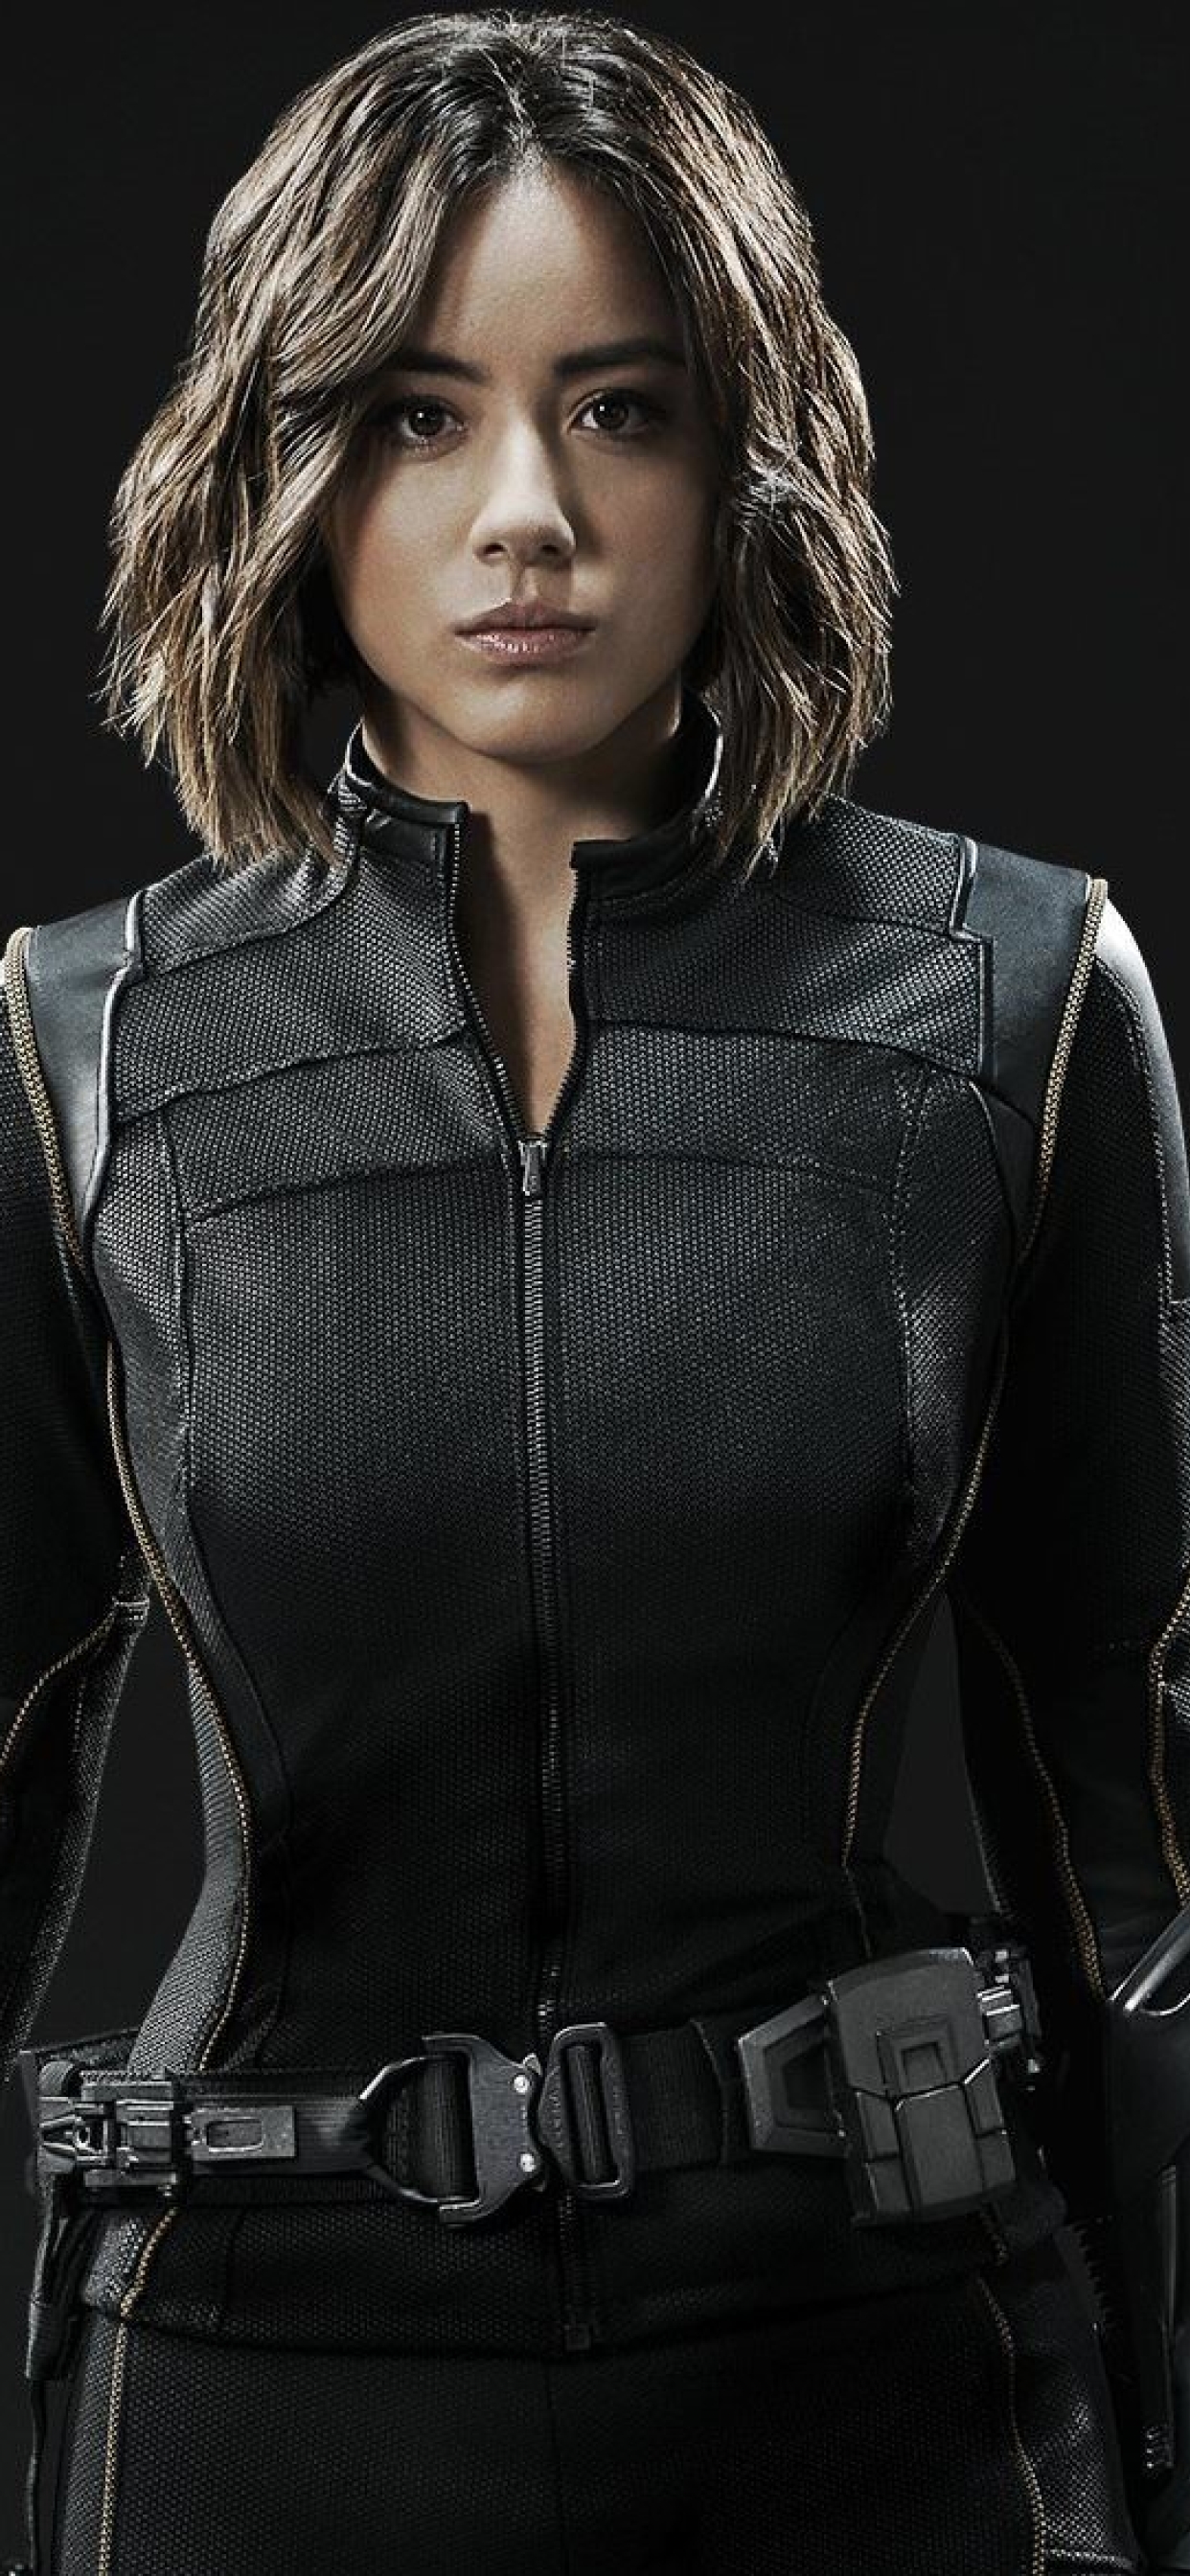 1242x2688 Chloe Bennet Agents Of Shield Actress Promo Photoshoot Iphone Xs Max Wallpaper Hd